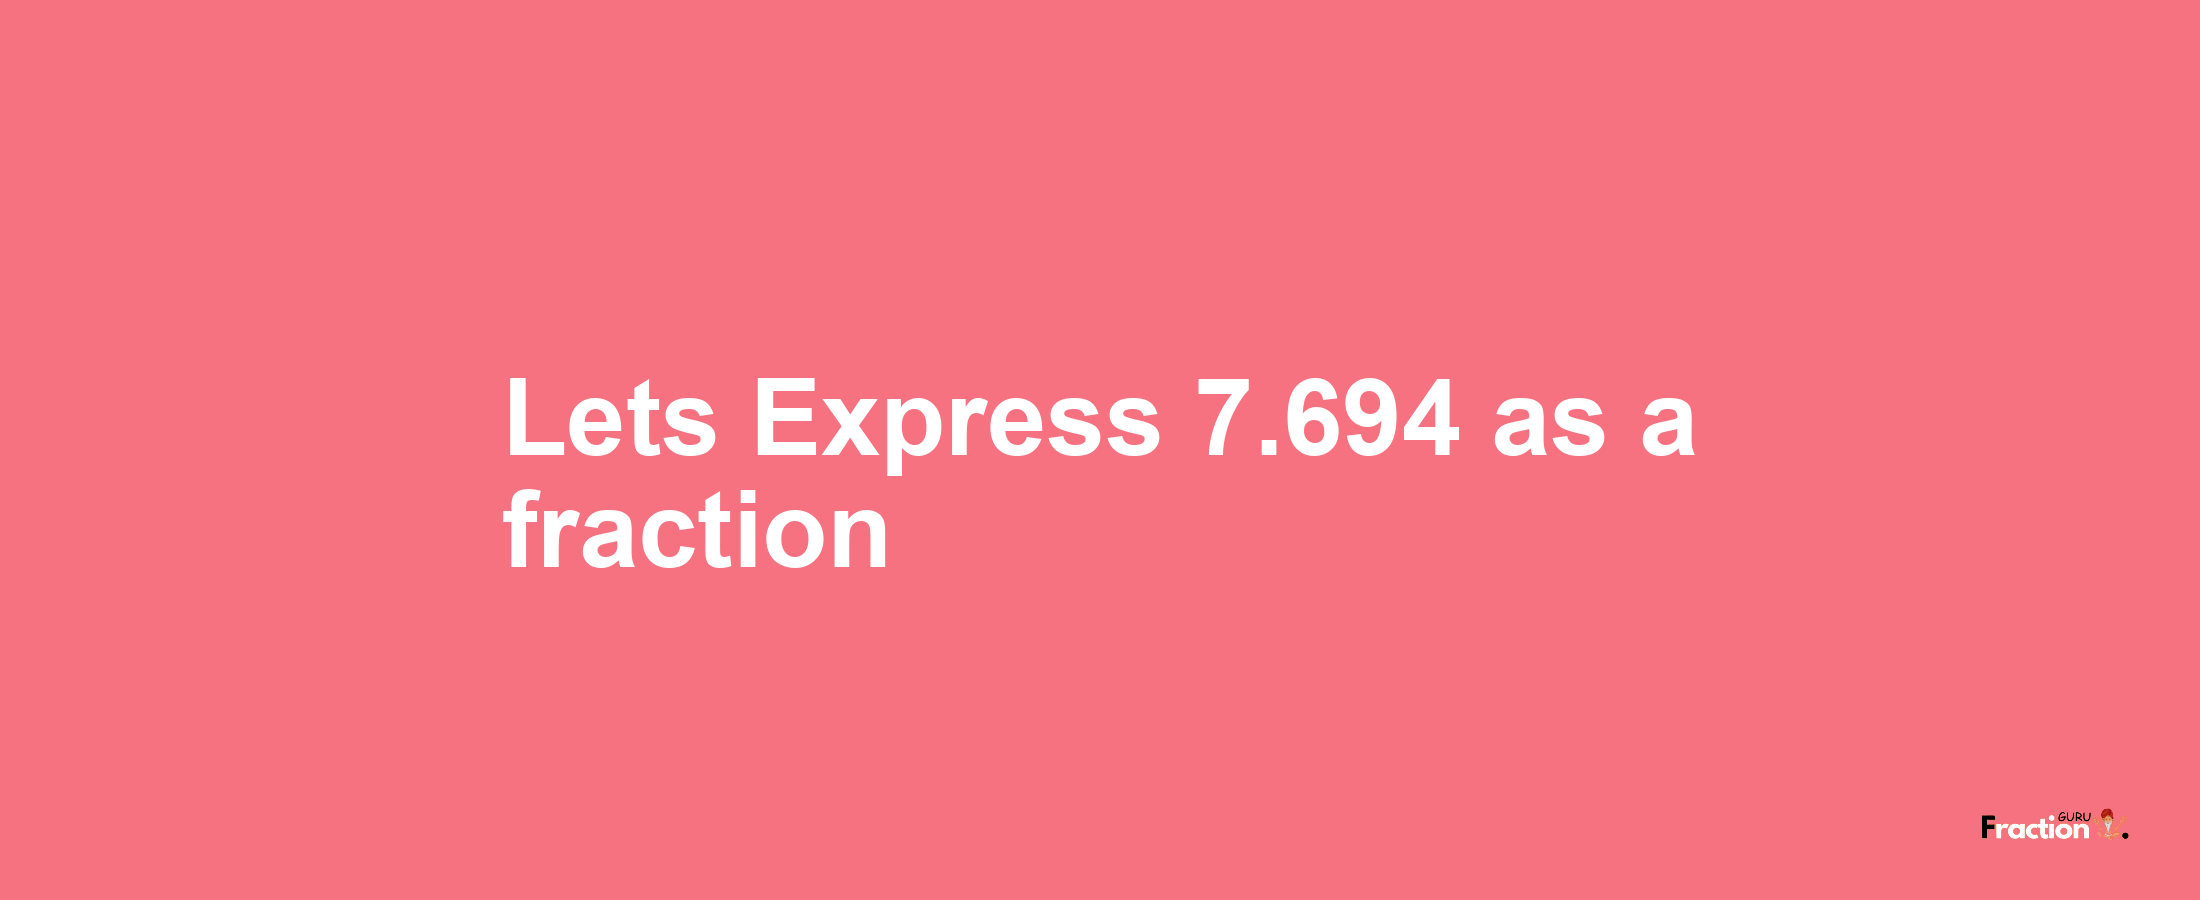 Lets Express 7.694 as afraction